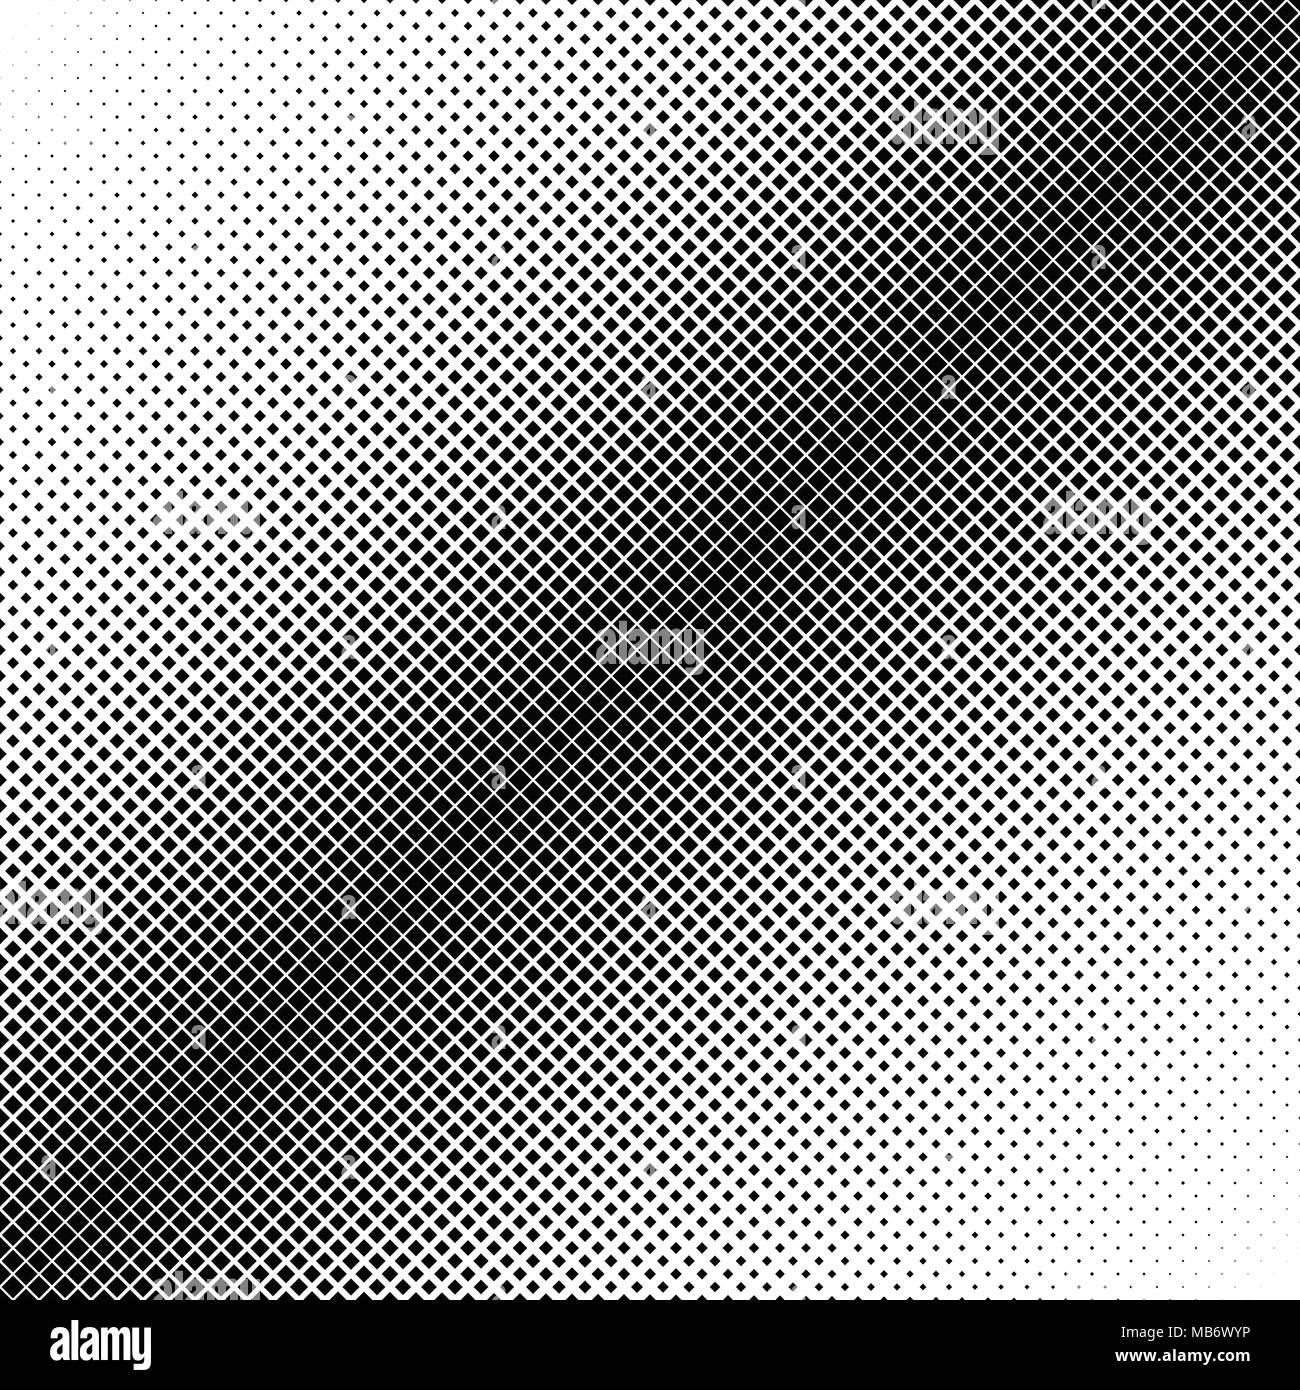 Geometrical halftone square pattern background Stock Vector